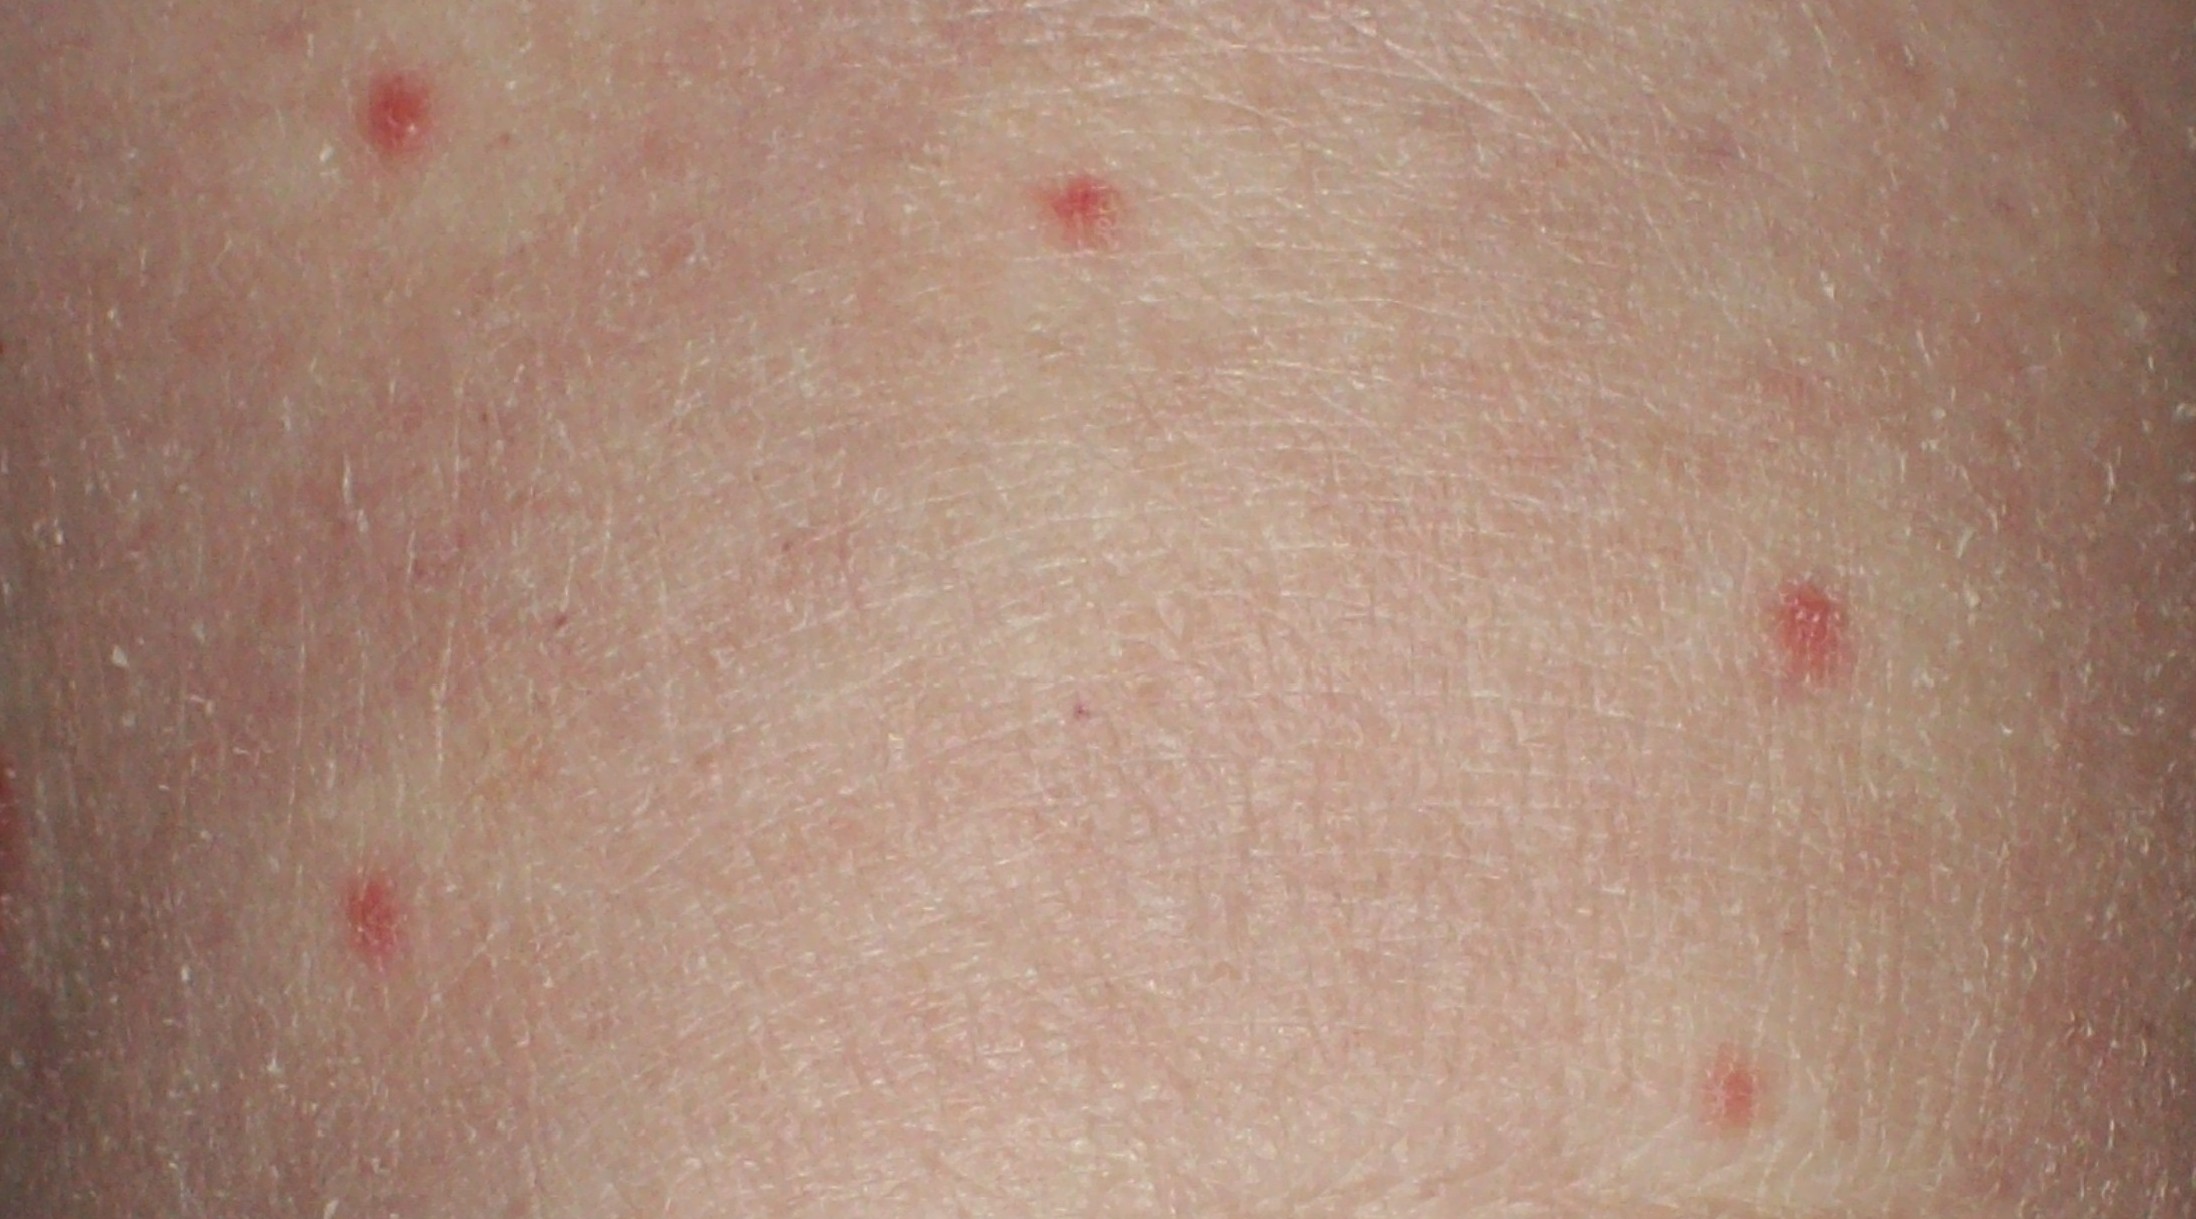 Red Spots On Skin Not Itchy